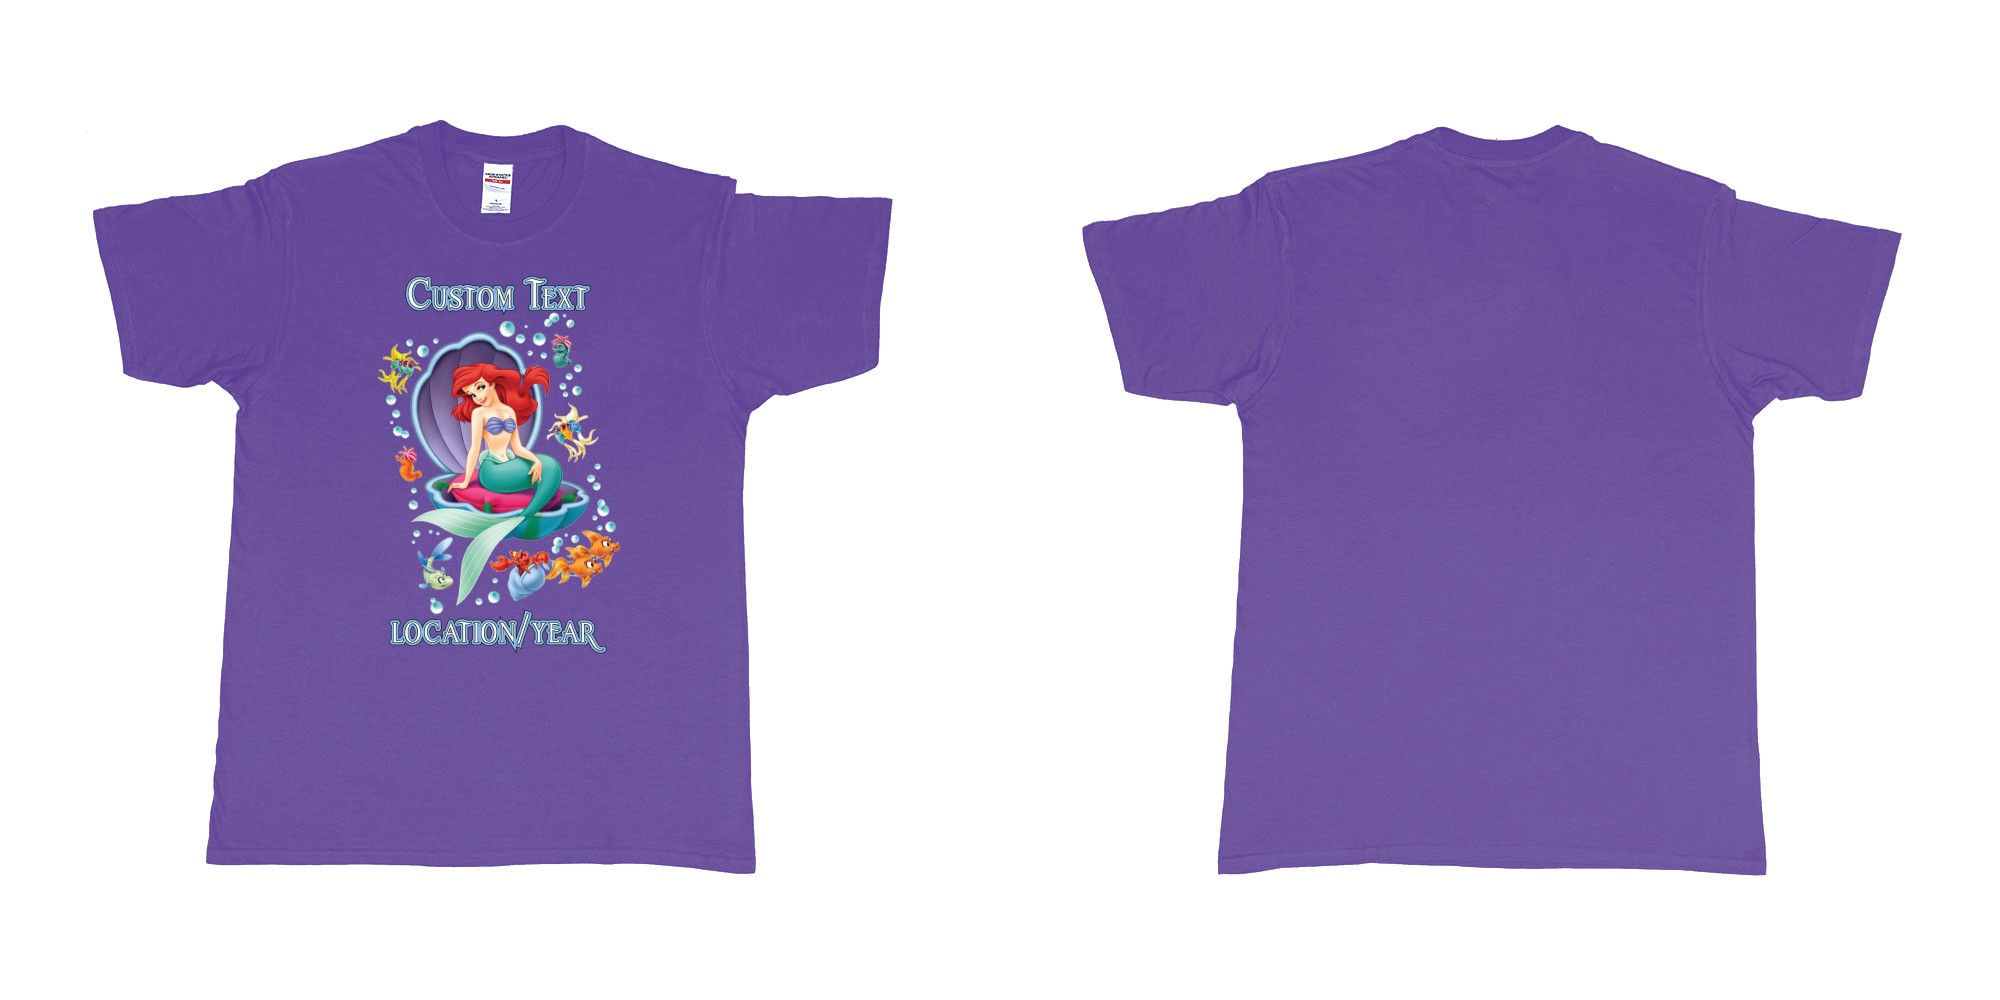 Custom tshirt design little mermaid shell birthday in fabric color purple choice your own text made in Bali by The Pirate Way